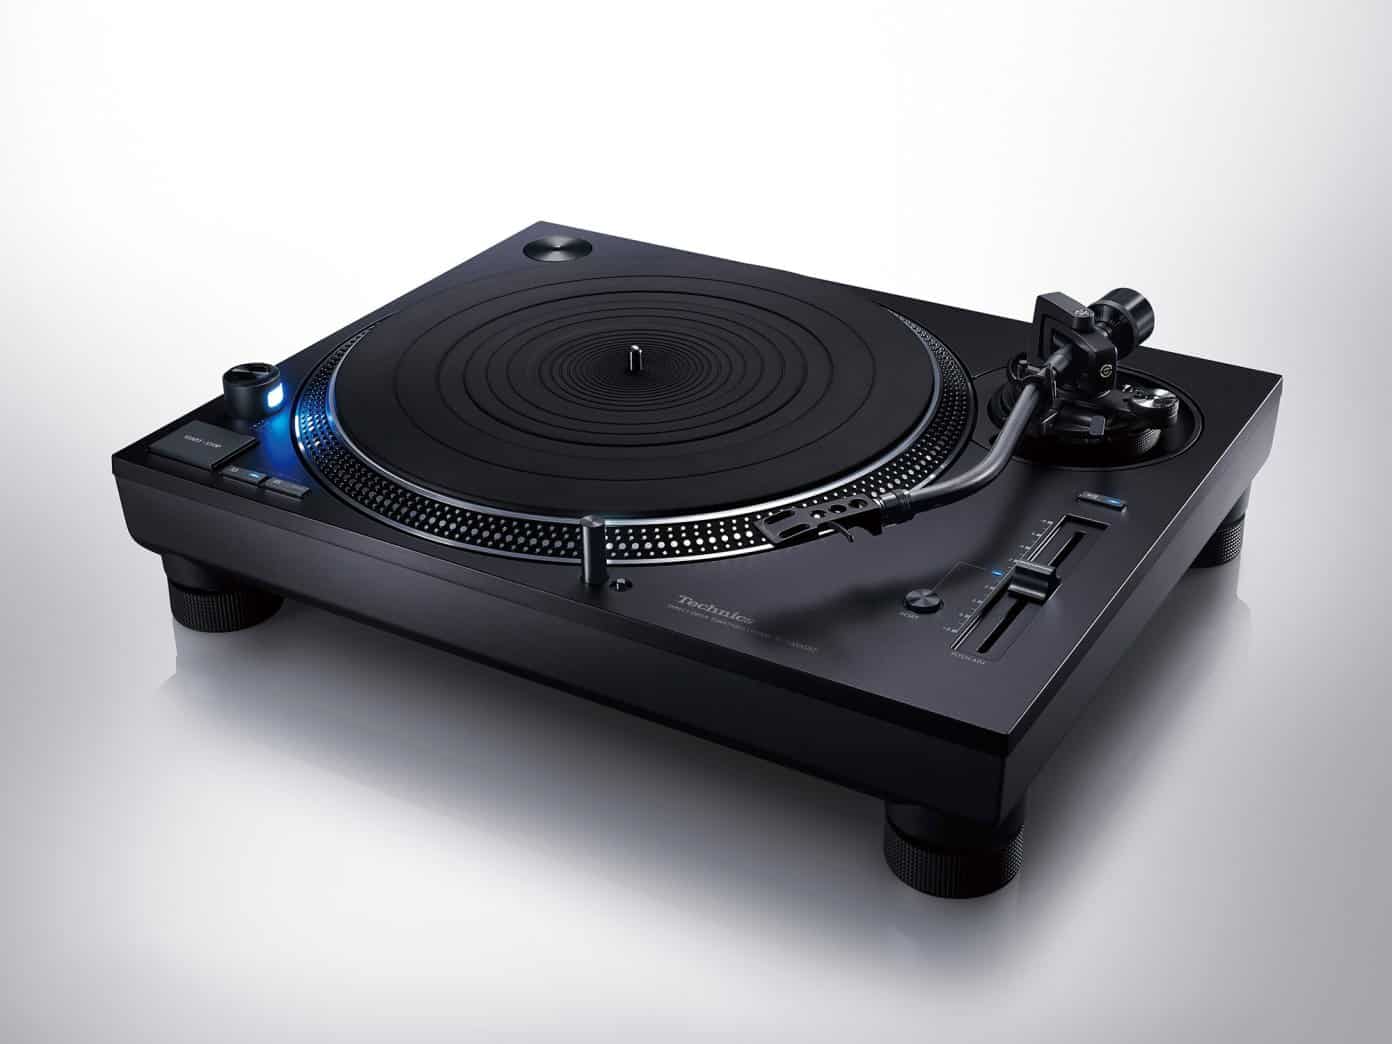 SL-1200GR2: Technics revamps its iconic turntable with cutting-edge upgrades